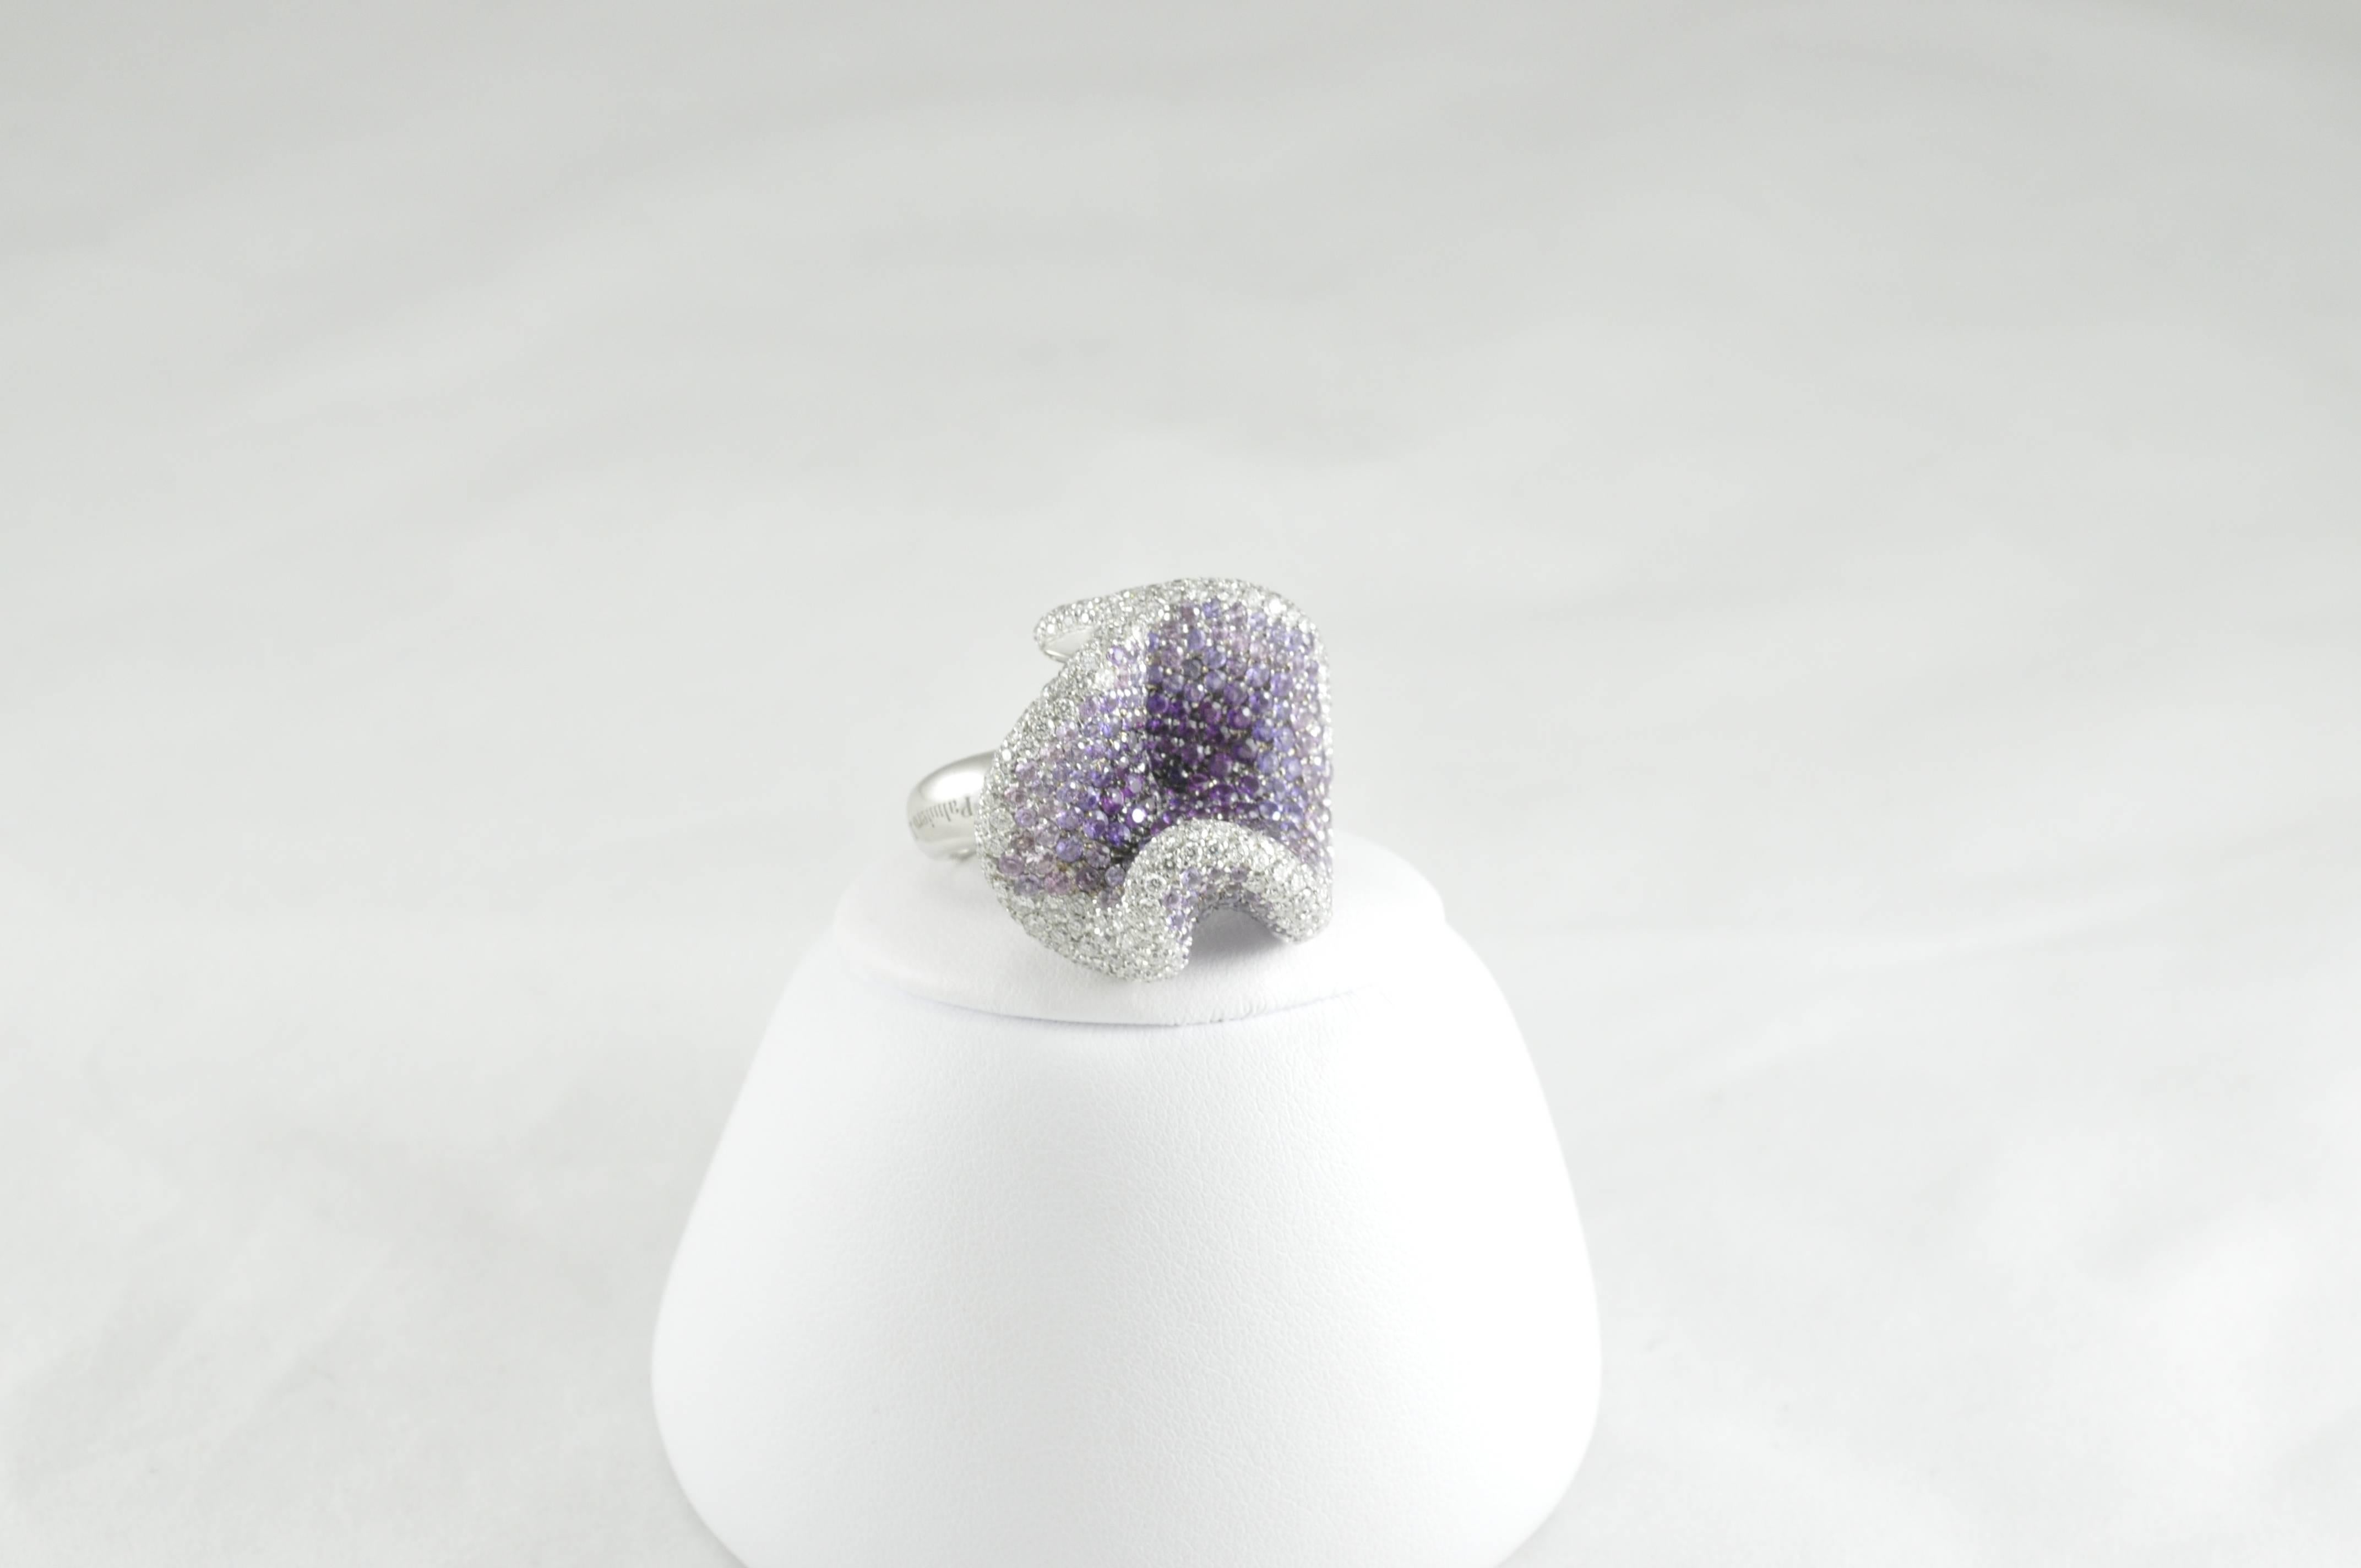 Palmiero Flower Ring 18K White Gold with Pink and Purple Sapphires and White Diamonds. The ring contains 224 Round Brilliant Diamonds at approximately 4.5ctw and 171 Pink and Purple Sapphires totaling roughly 5.00ctw. 
The ring is stamped 750 JD,